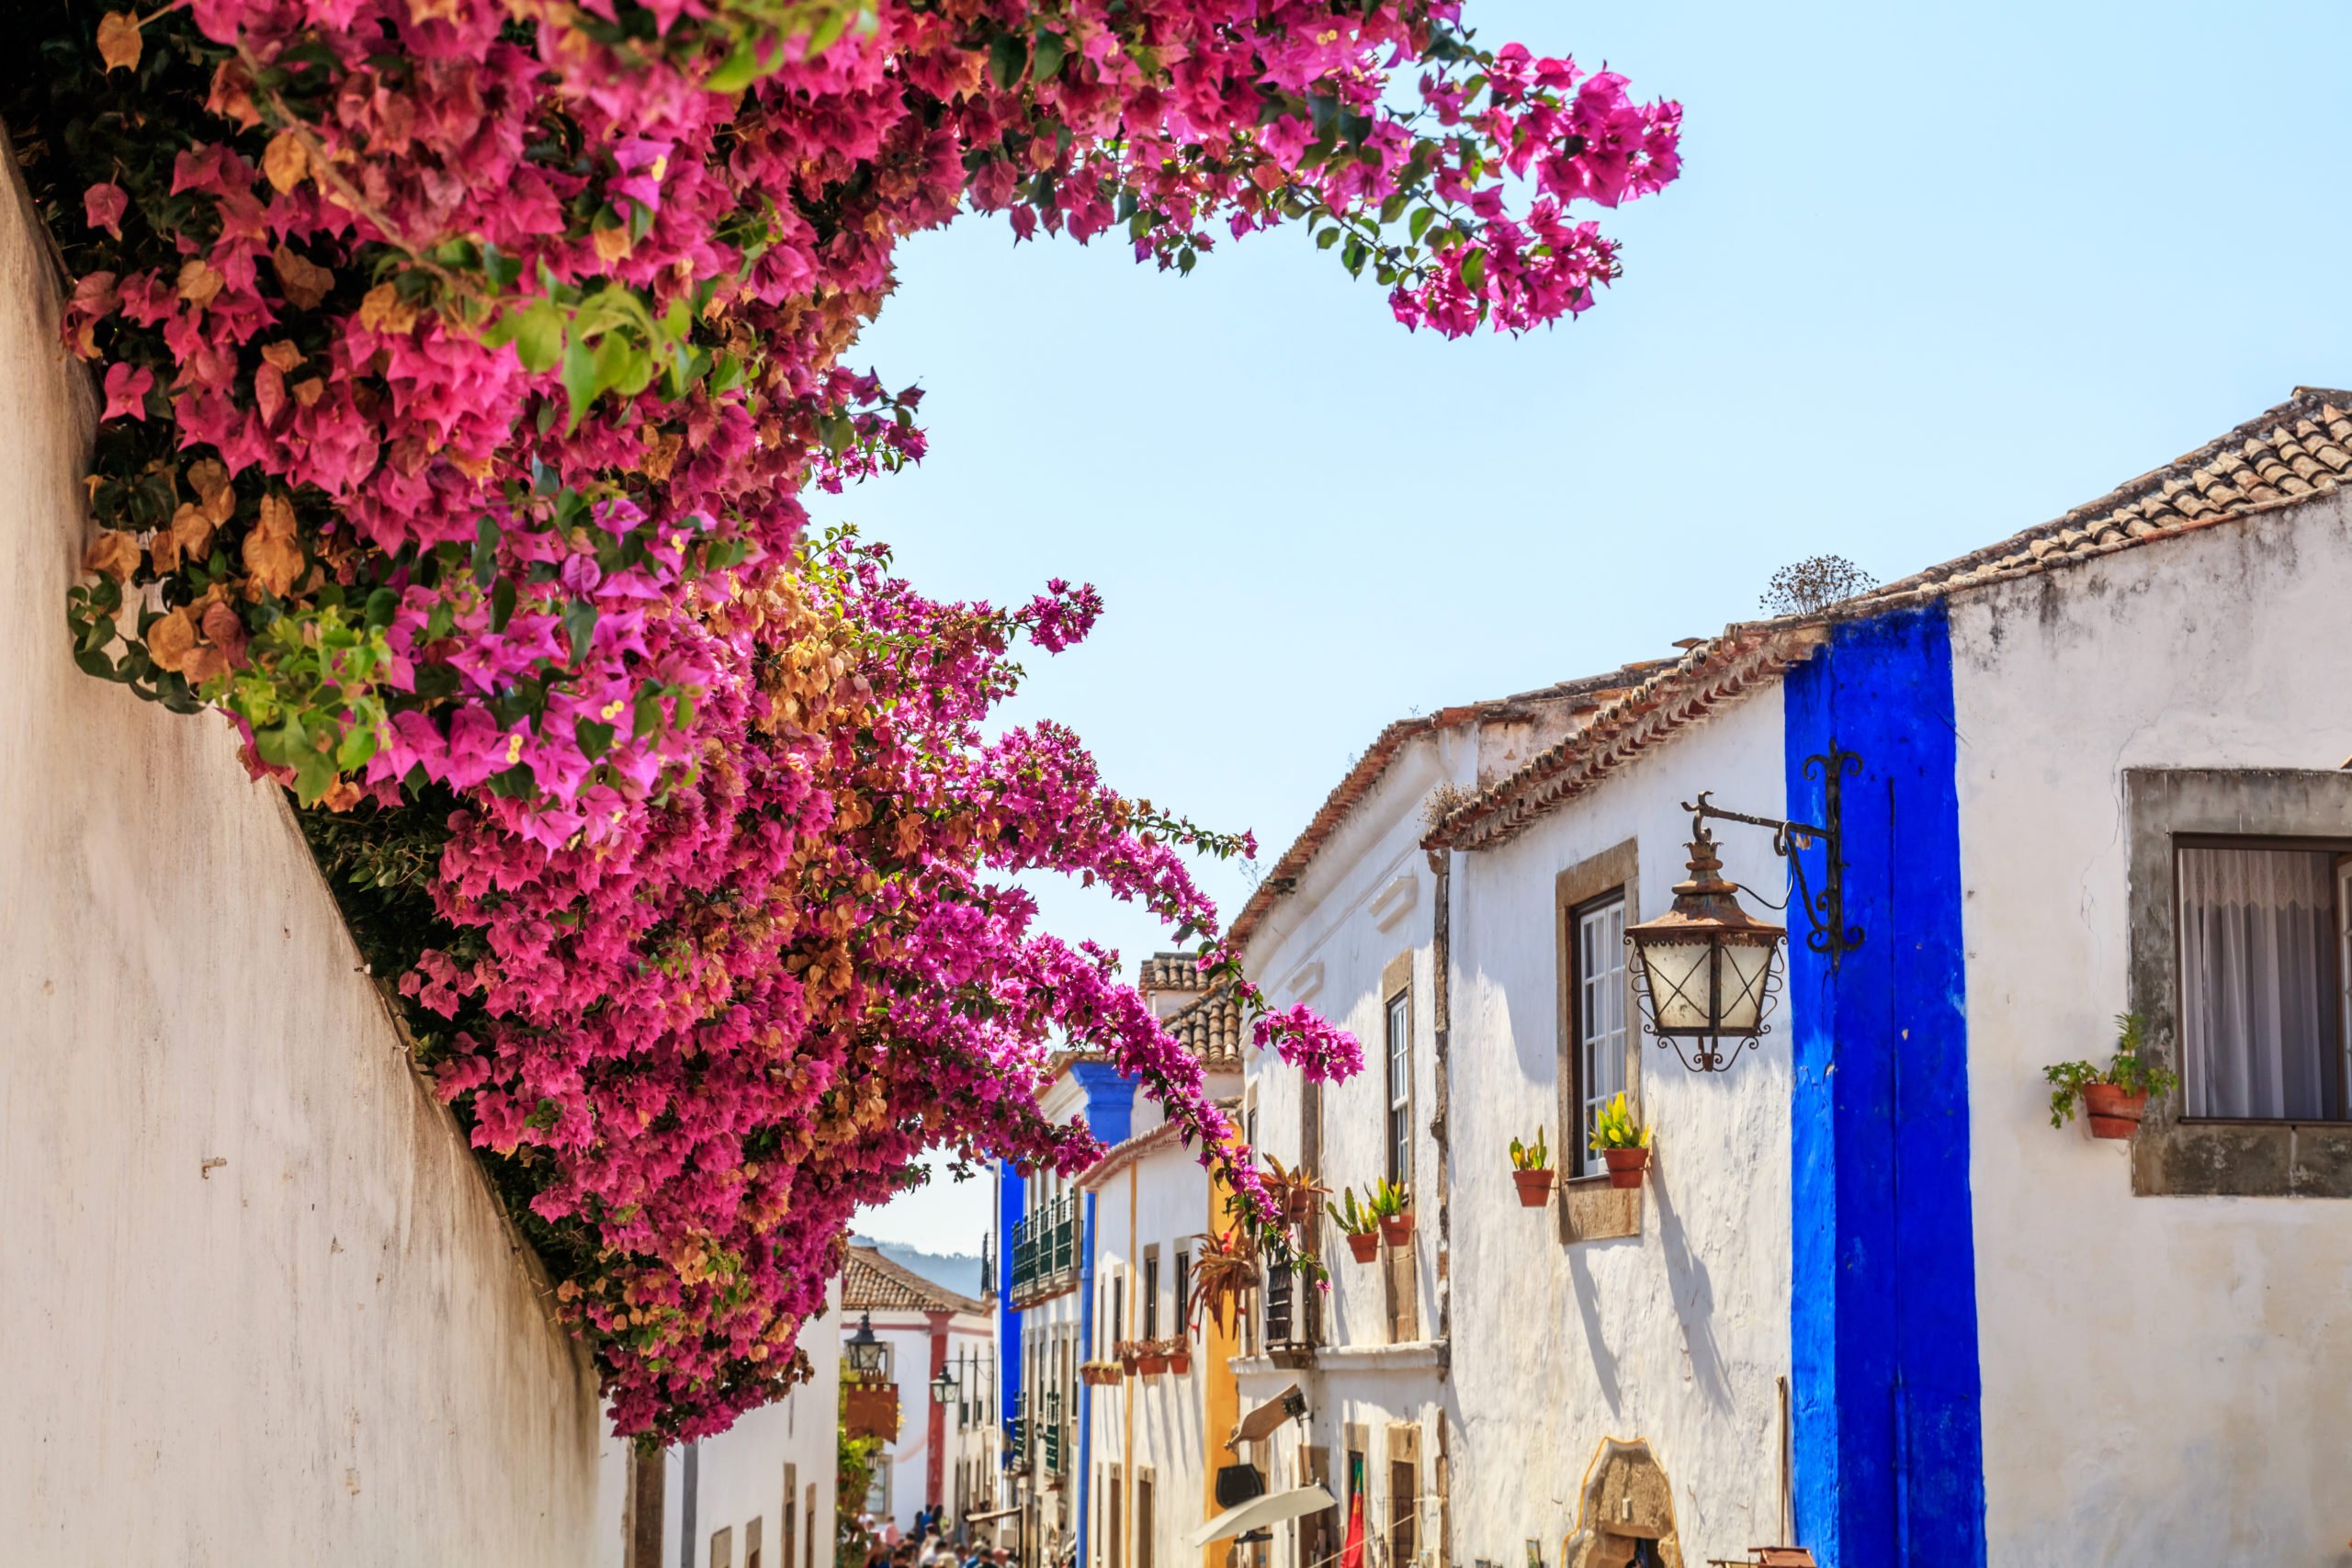 Stroll Through The Picturesque Streests Of Obidos On The Fatima Tour From Lisbon